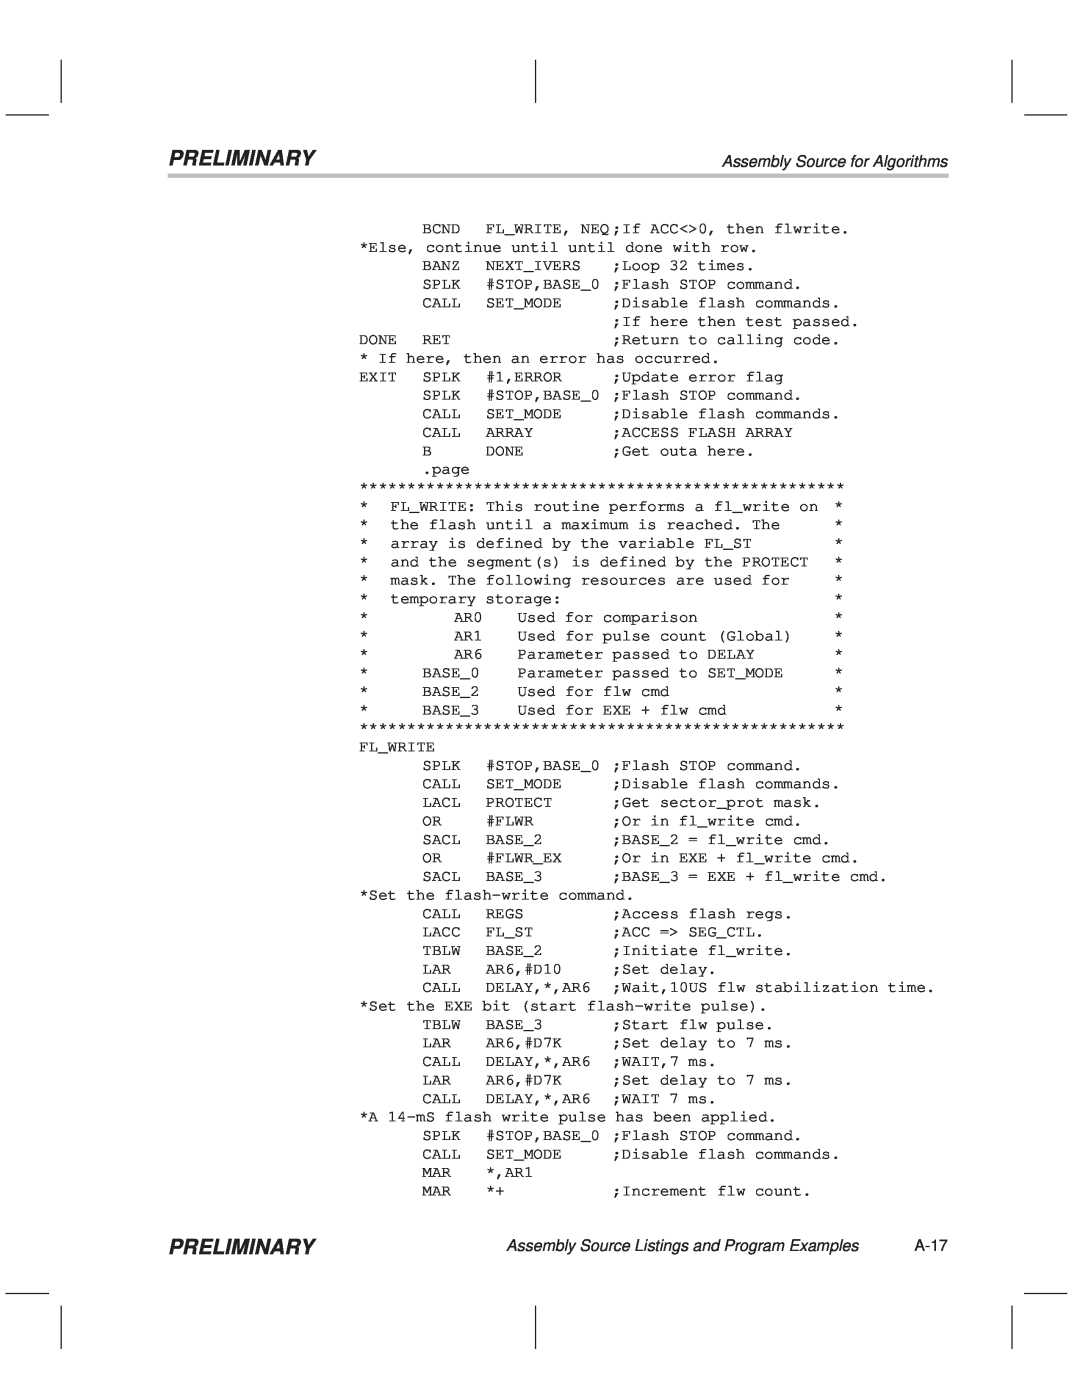 Texas Instruments TMS320F20x/F24x DSP manual Preliminary, Assembly Source for Algorithms, A-17 